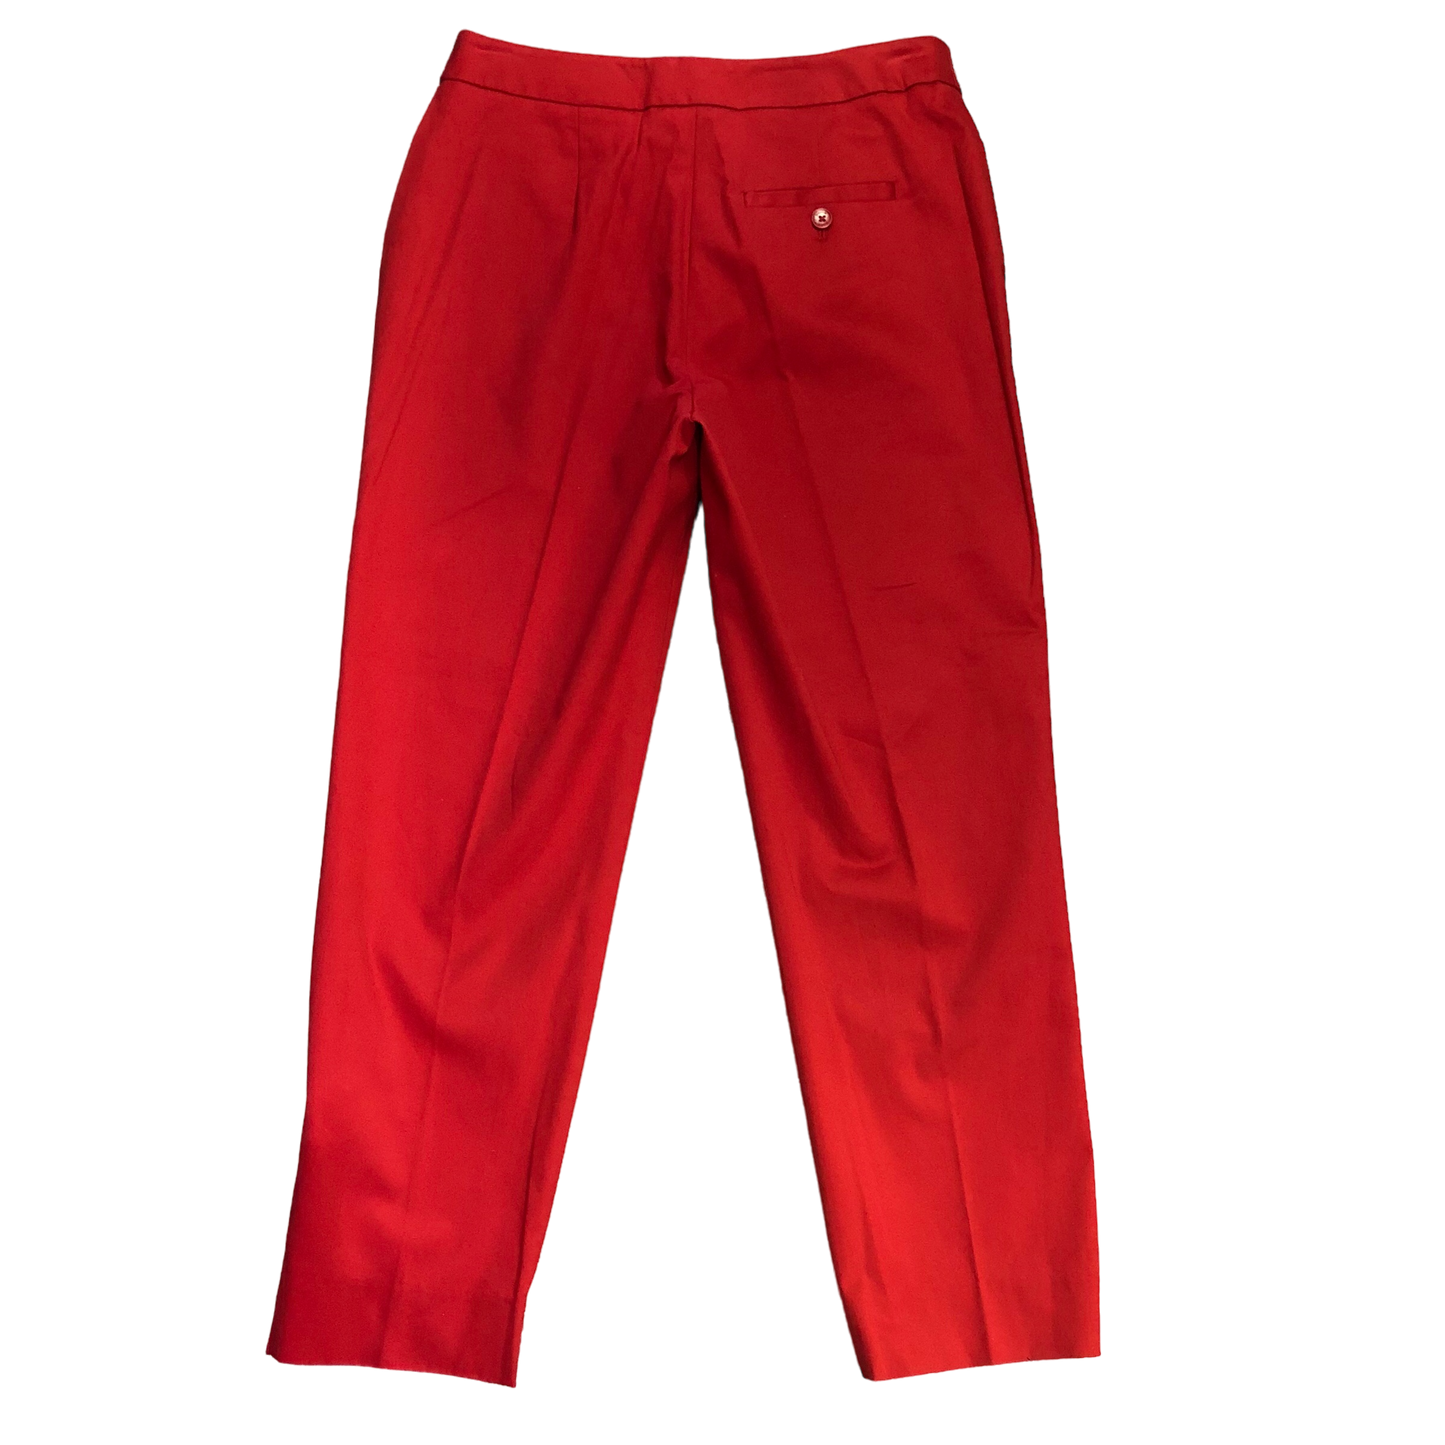 Pants Ankle By Jones New York  Size: 6petite